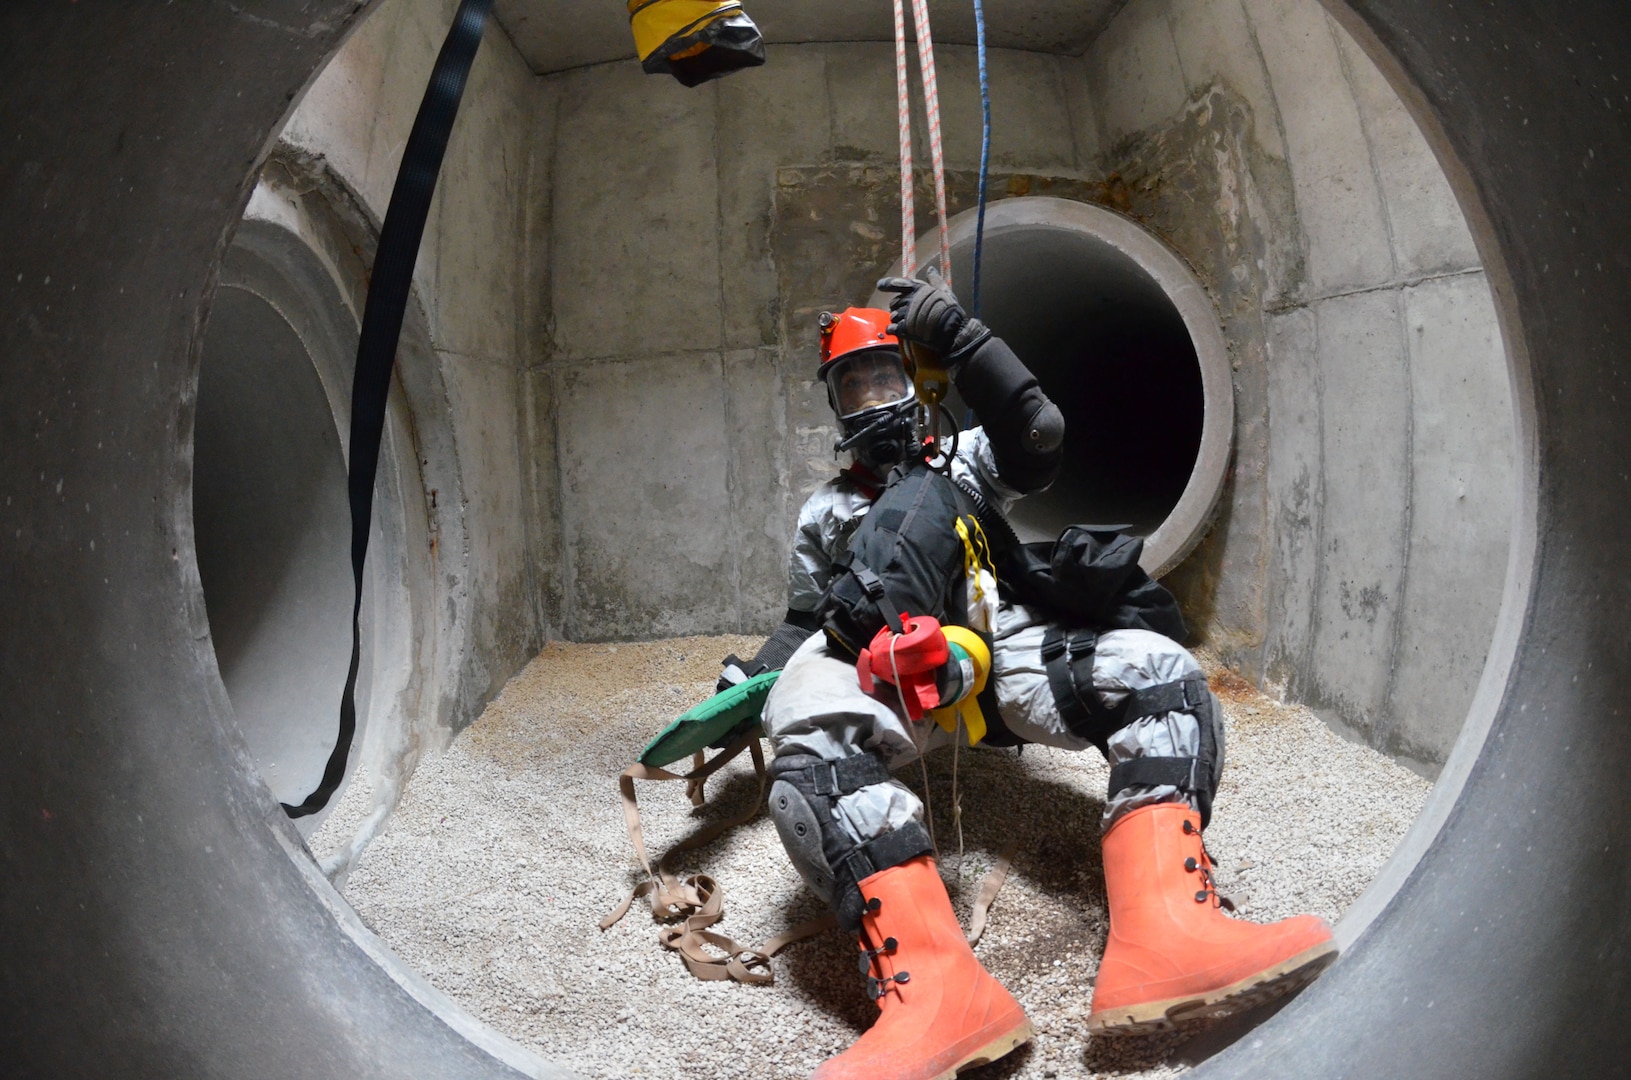 Tech. Sgt. Danreb Faustino from the Florida Air National Guard's 125th Medical Group is hoisted from a tunnel as part of a simulated collapsed building during a FL-CERFP External Evaluation at Camp Blanding Joint Training Center, Fla., March 27, 2014. 